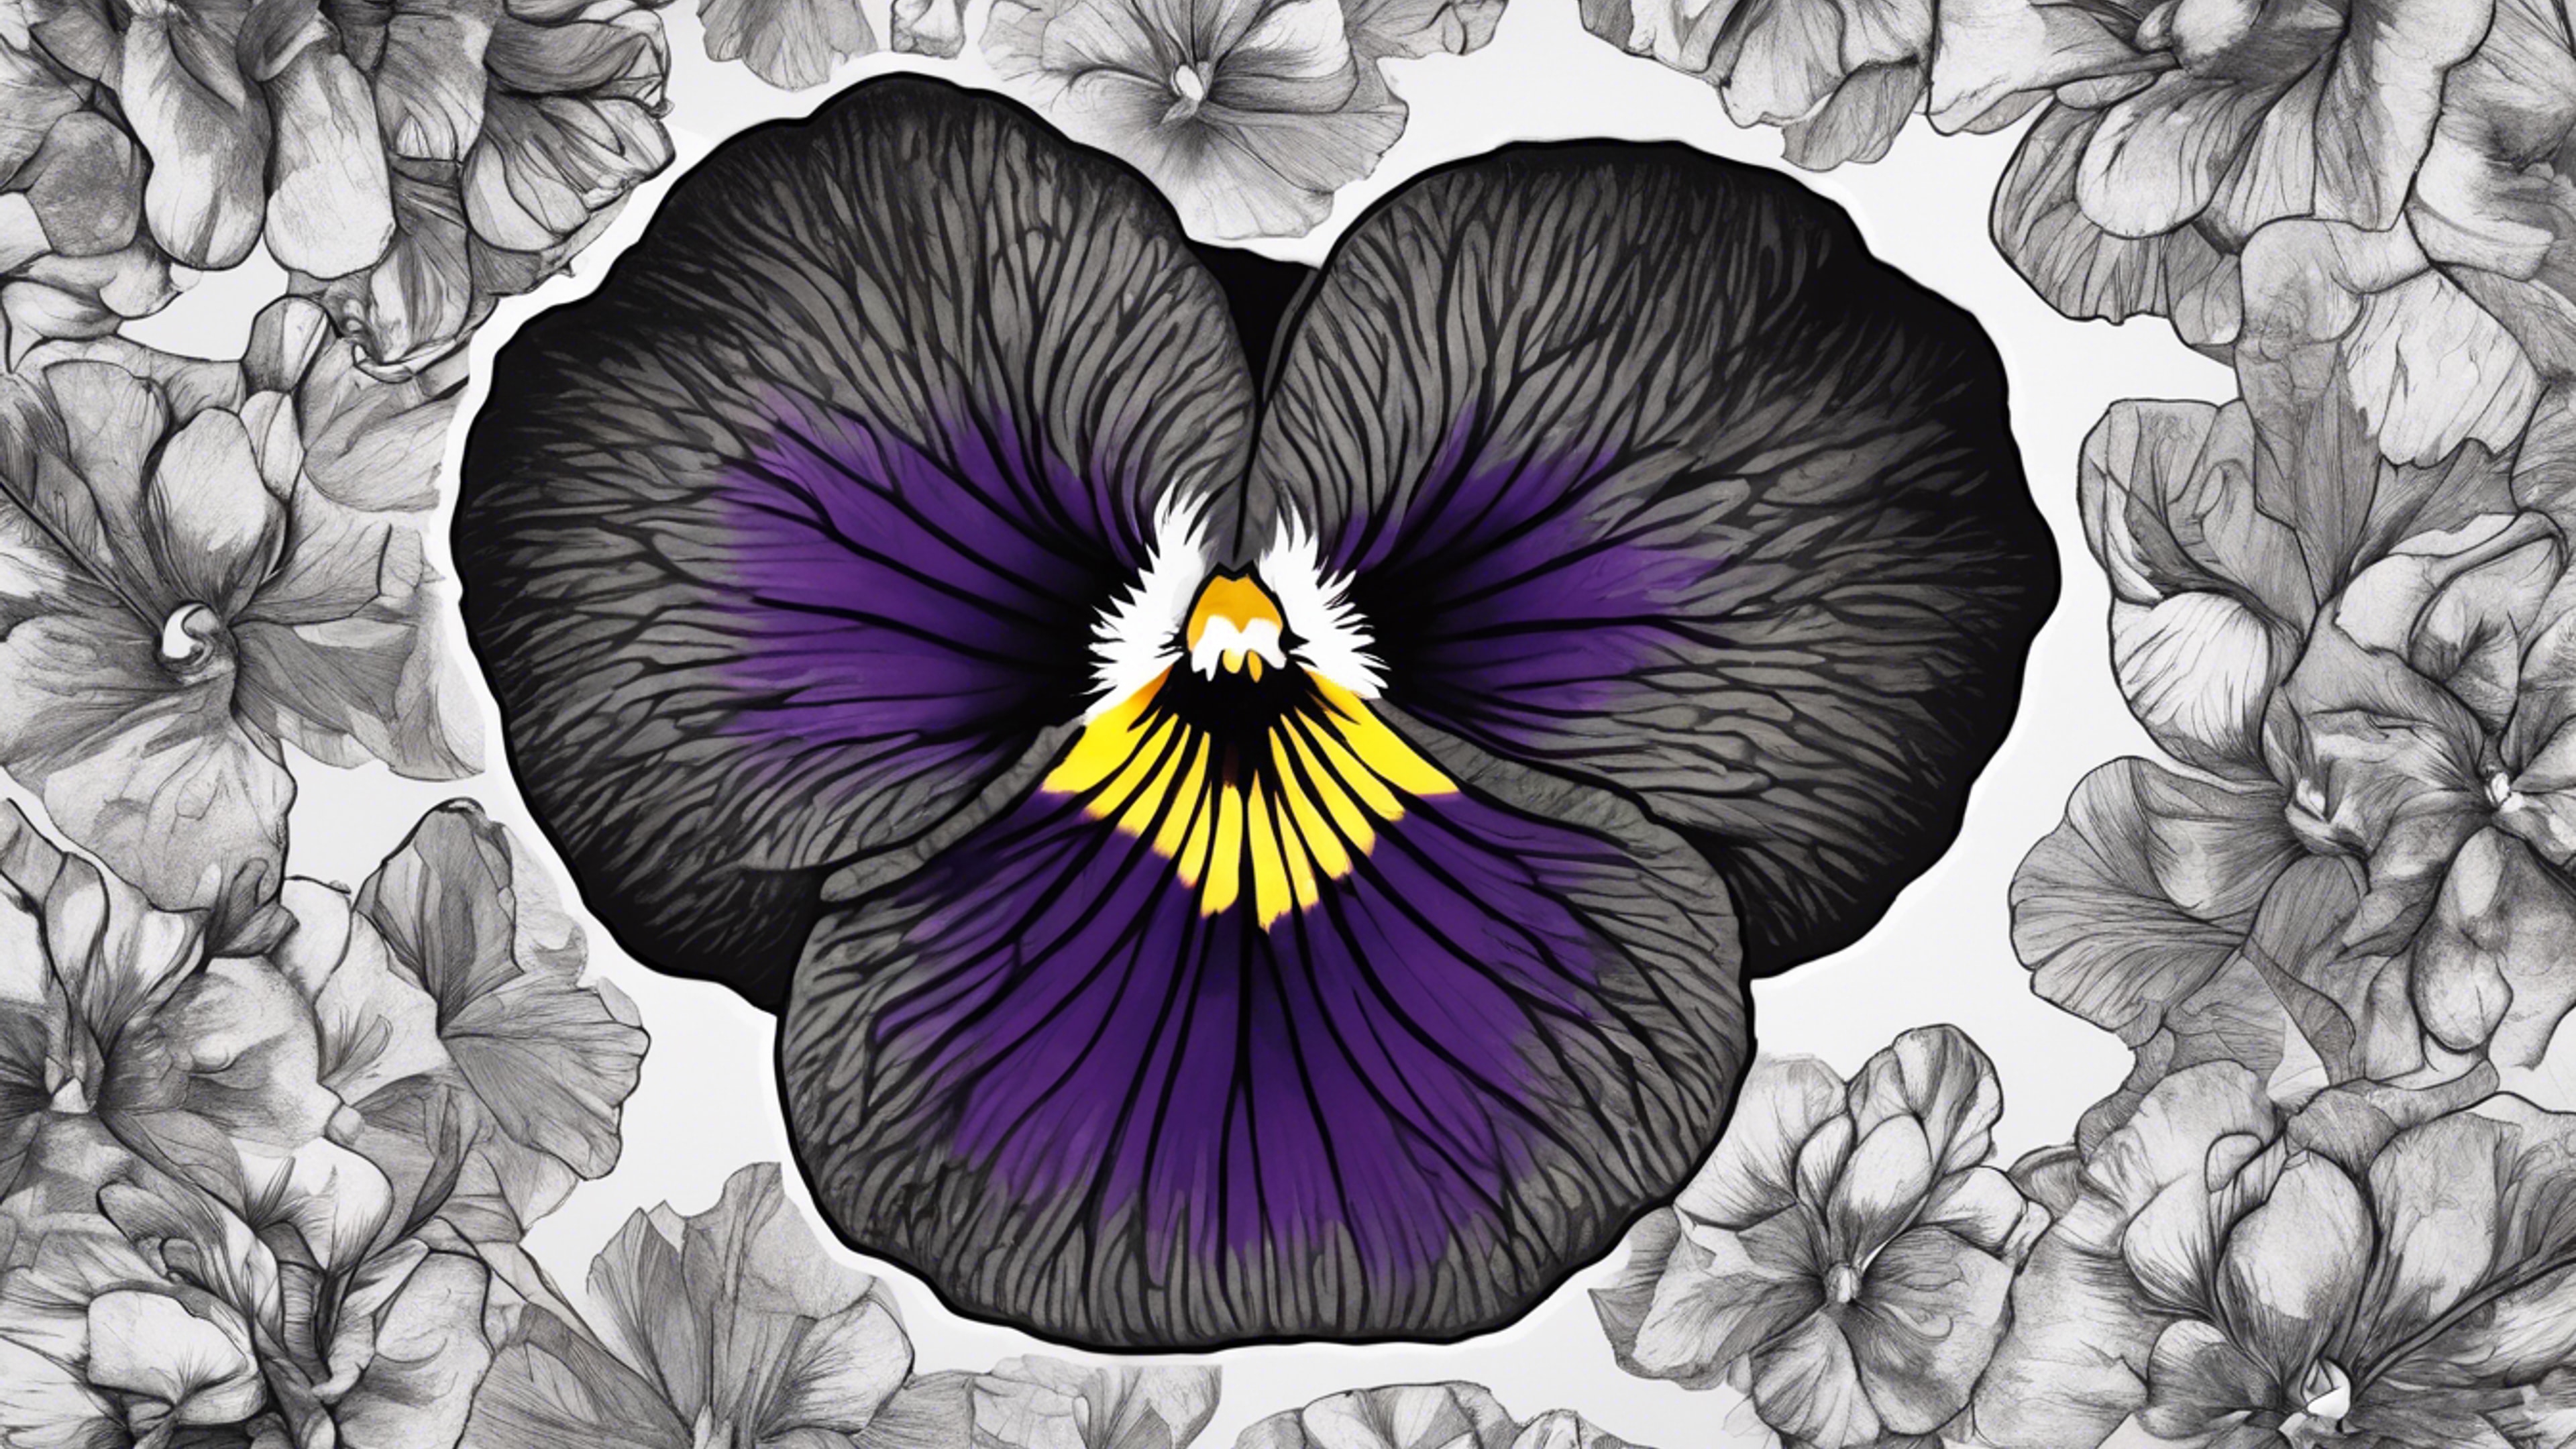 A beautifully detailed drawing of a black pansy with a heart-shaped pattern in the center. Divar kağızı[63bdabf8c2fc479fa211]